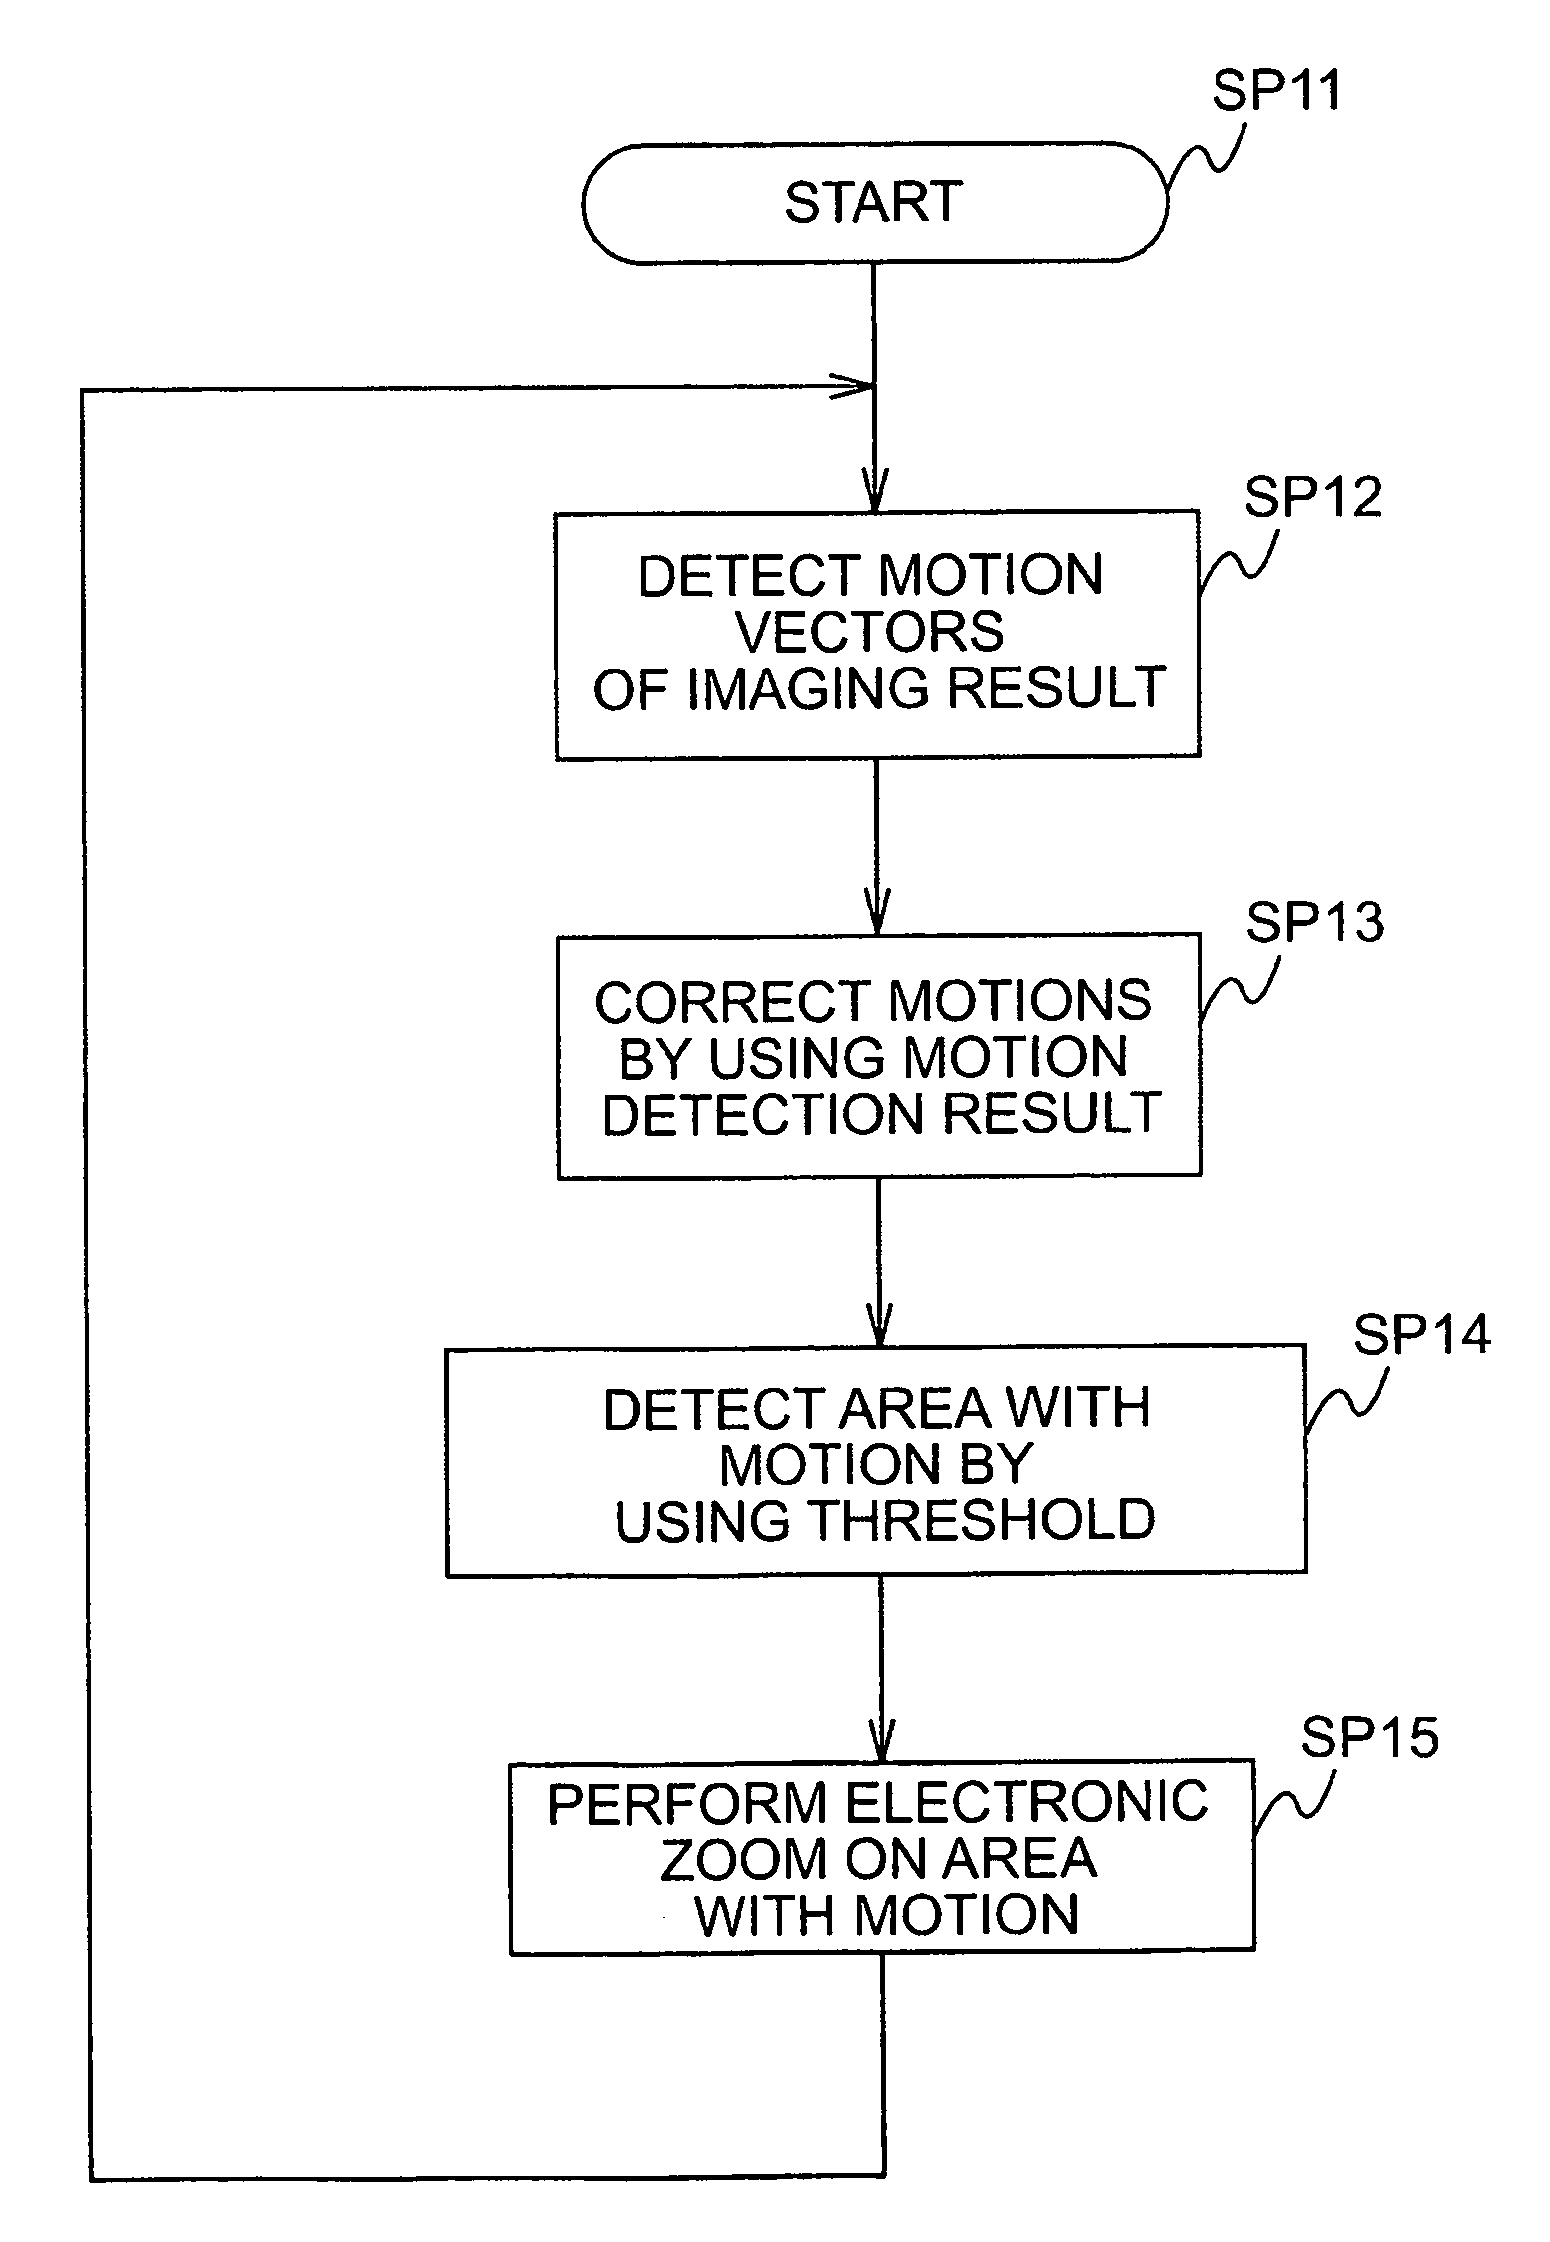 Imaging apparatus and method for processing imaging results